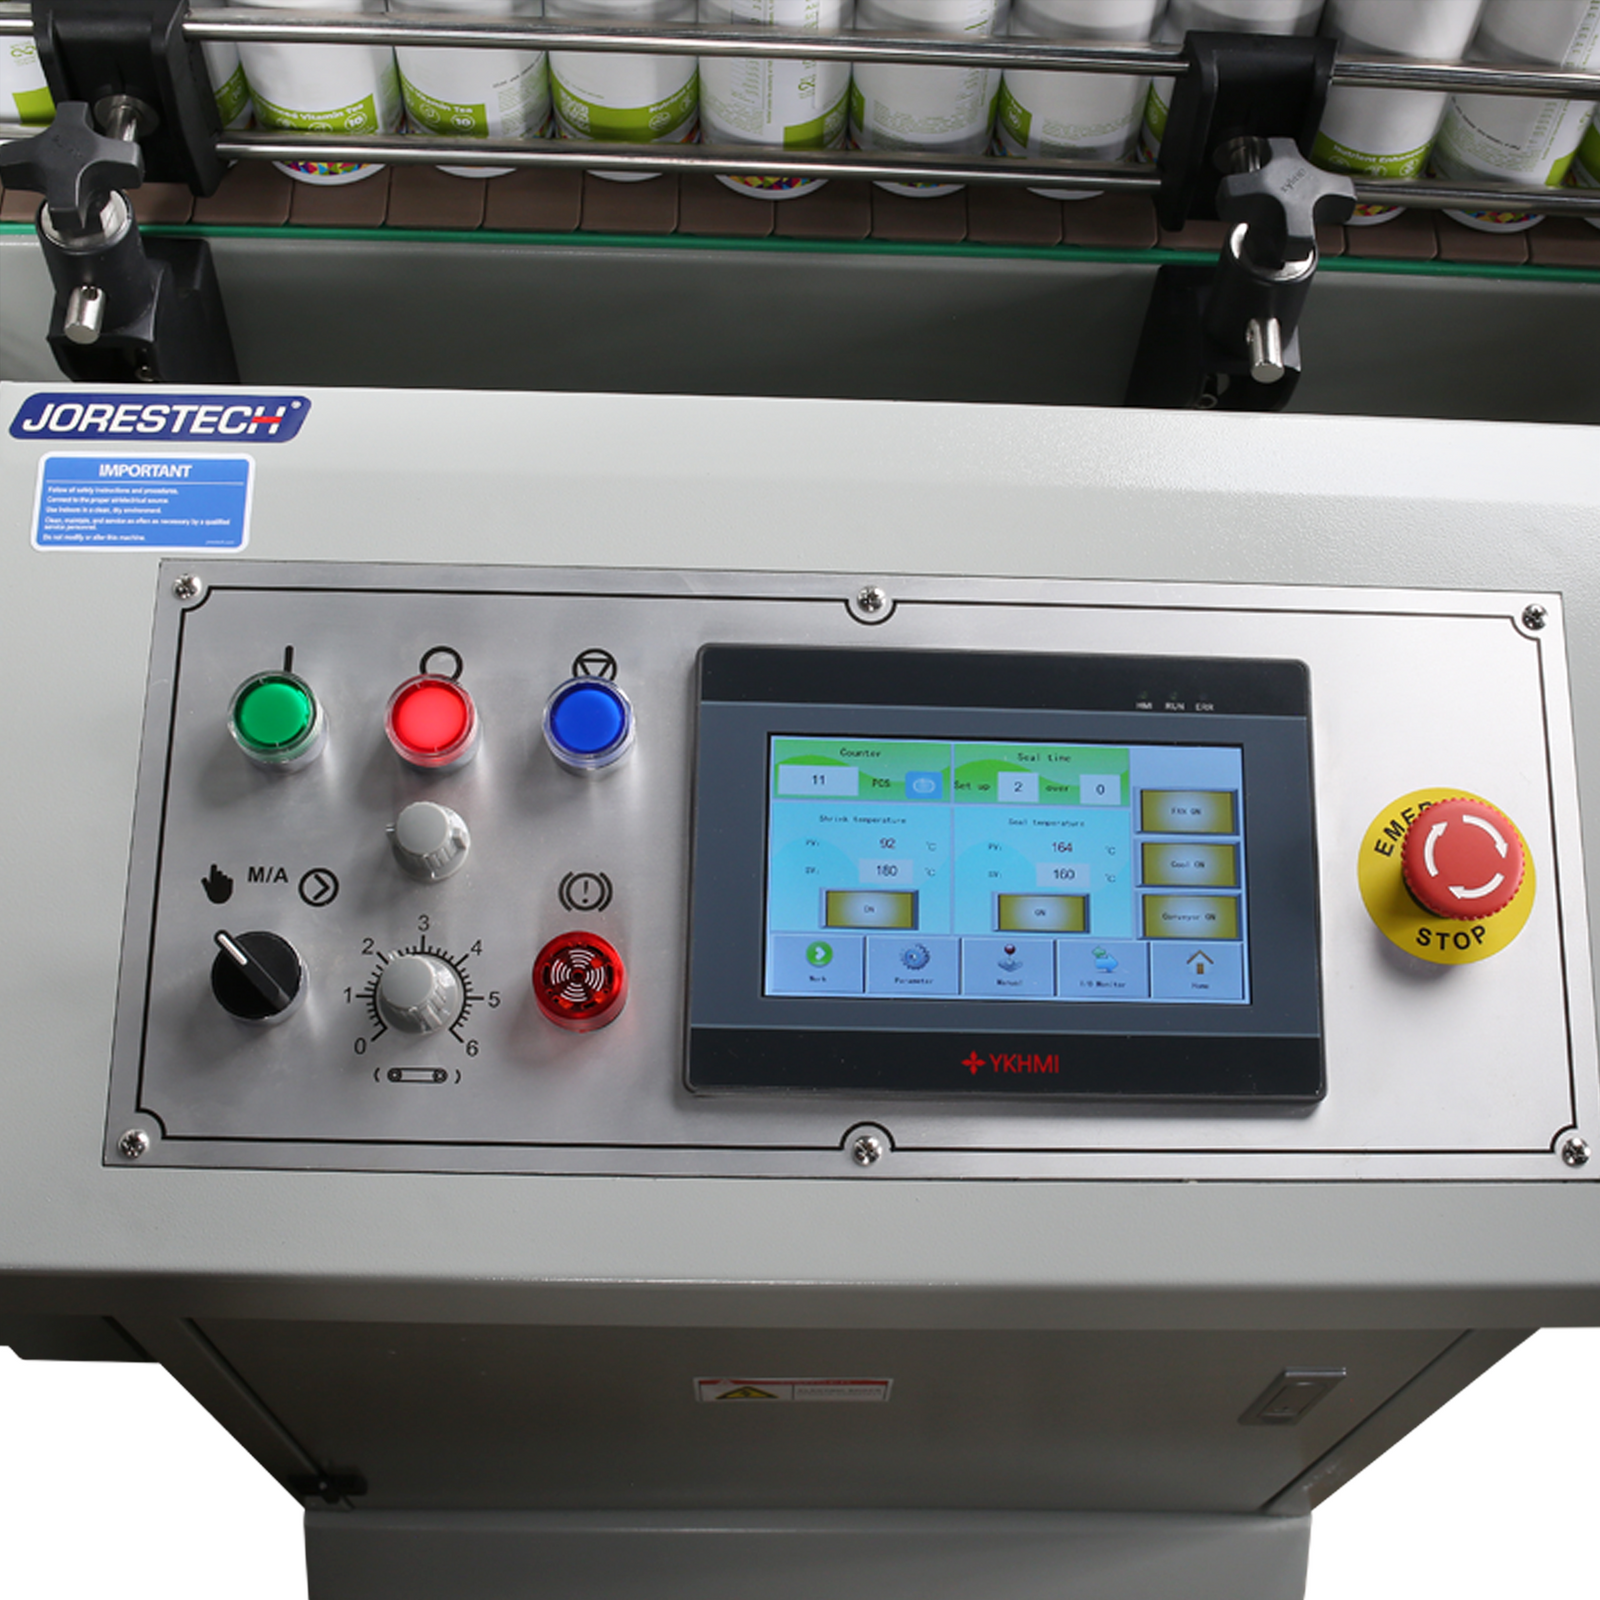 Digital control panel on the Automatic shrink sleeve wrapping system for bundles